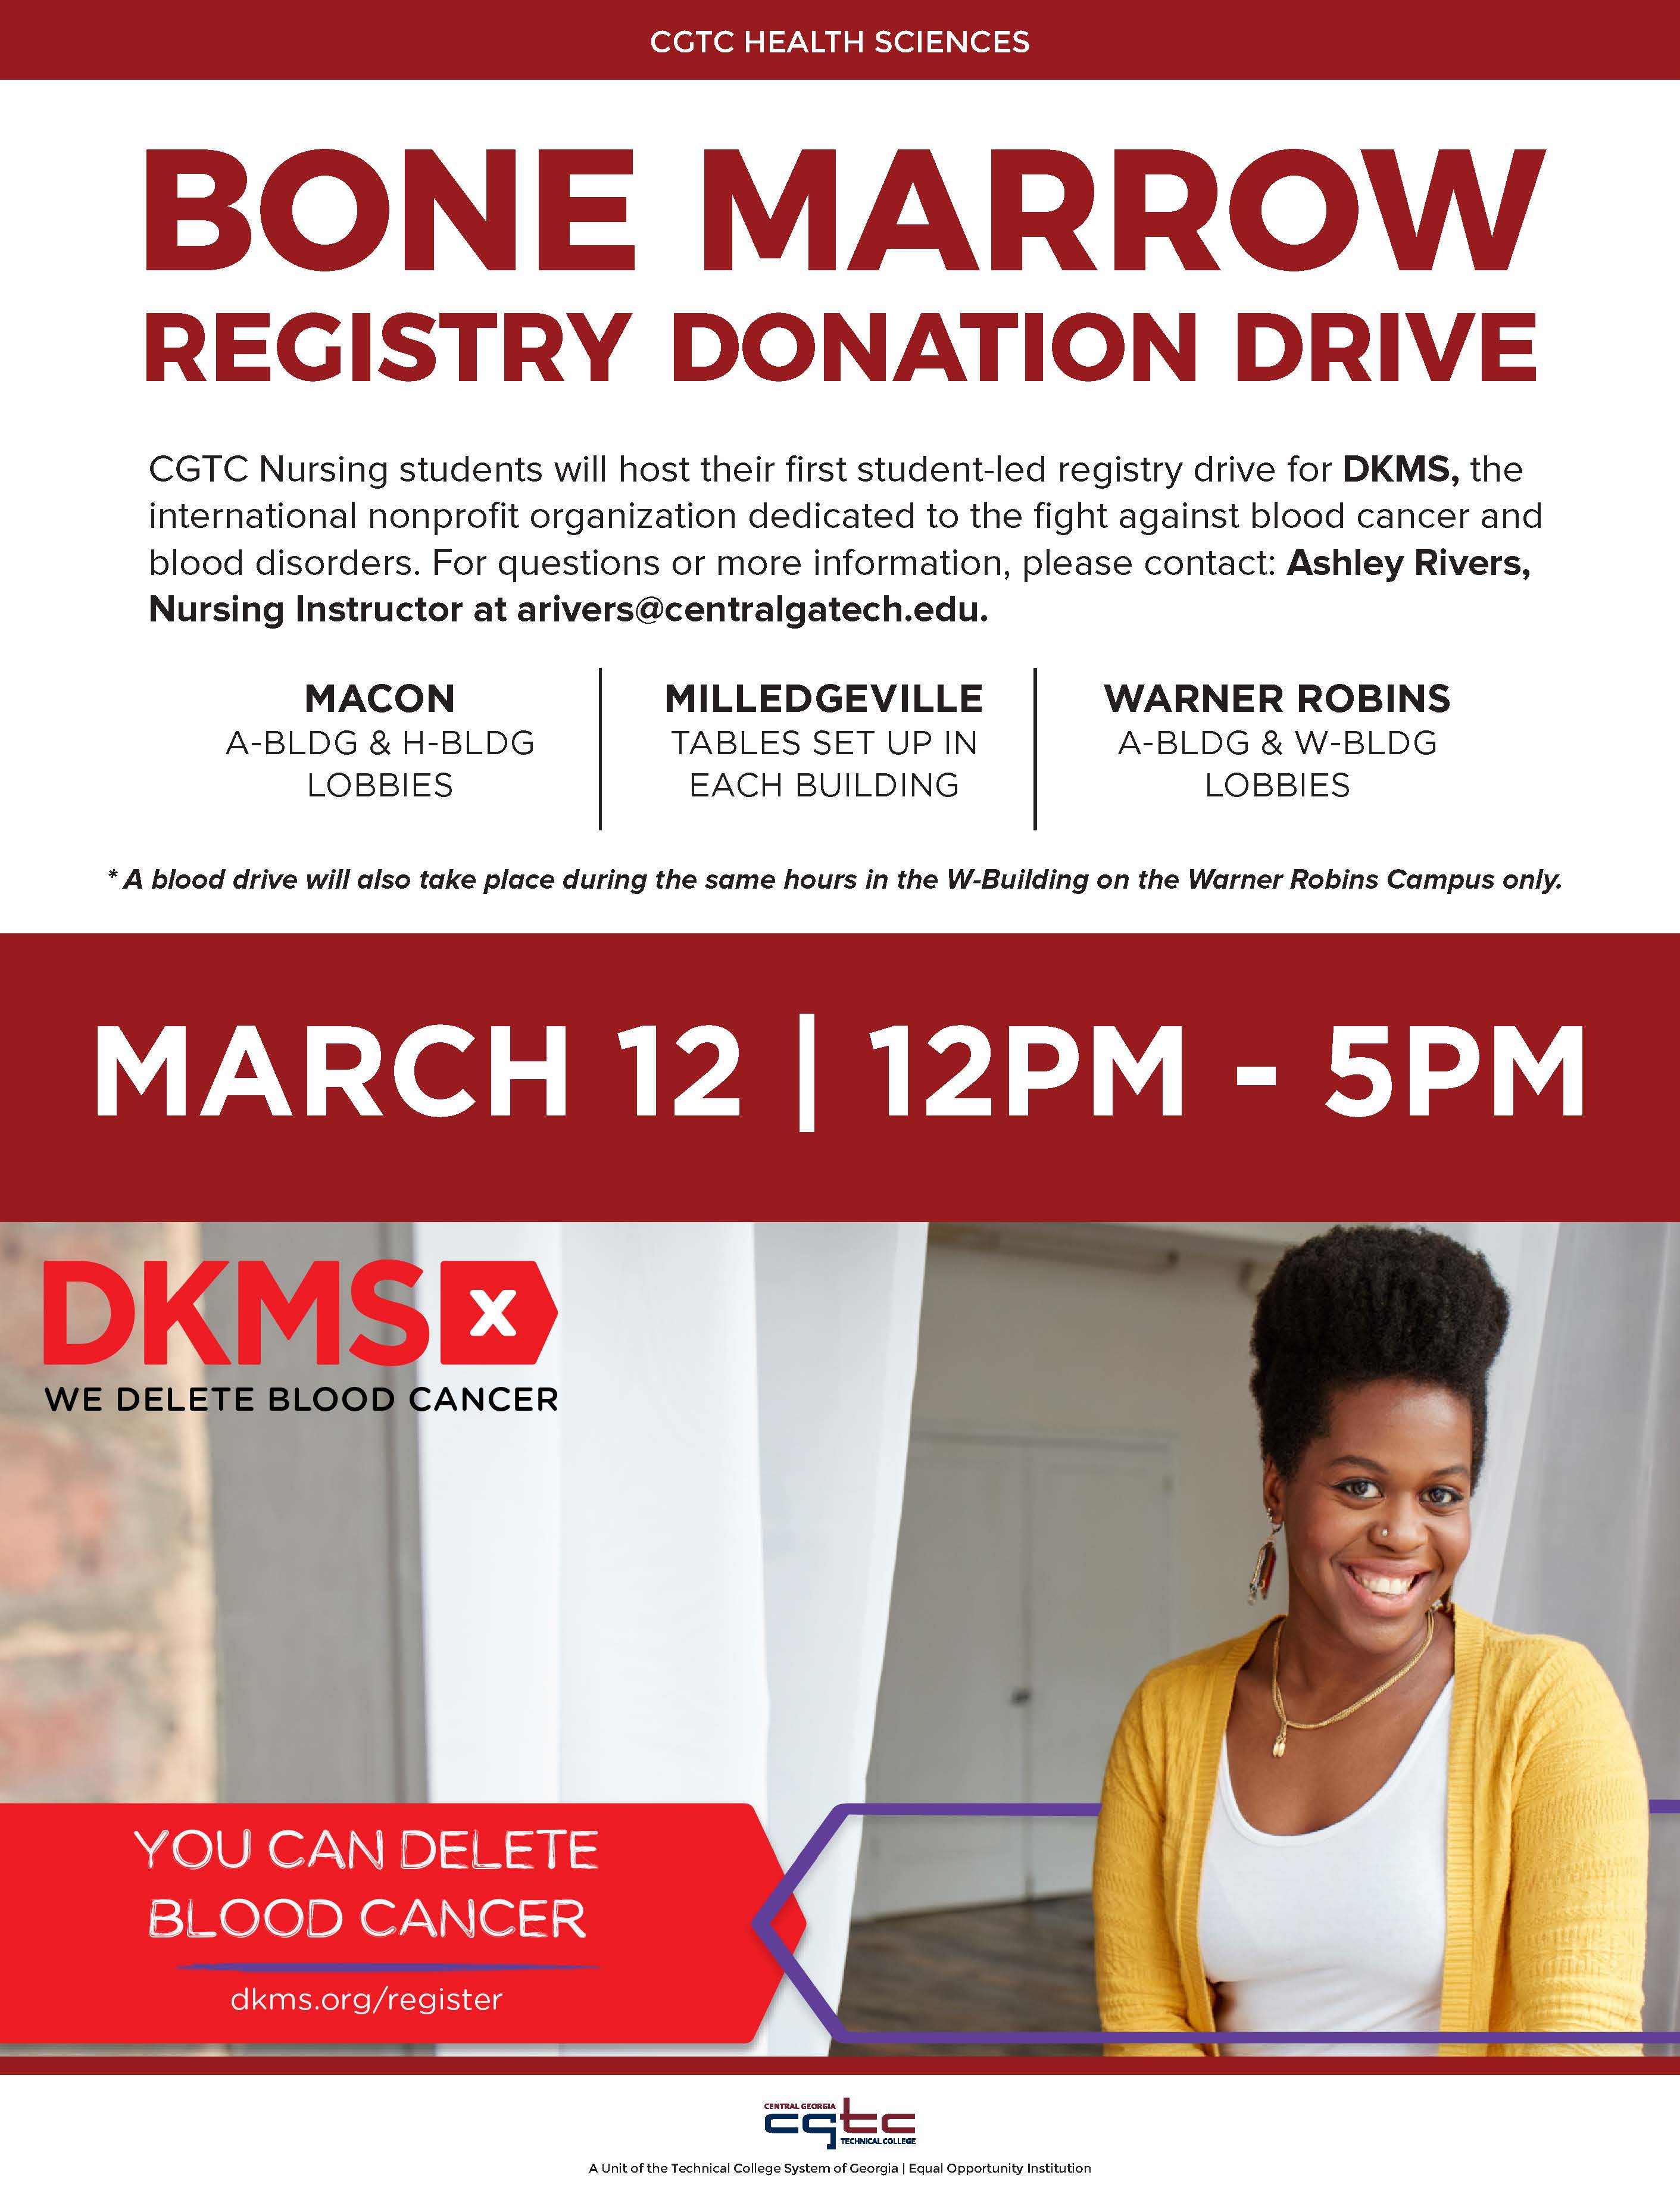 Infographic for upcoming bone marrow registry drive at CGTC. 